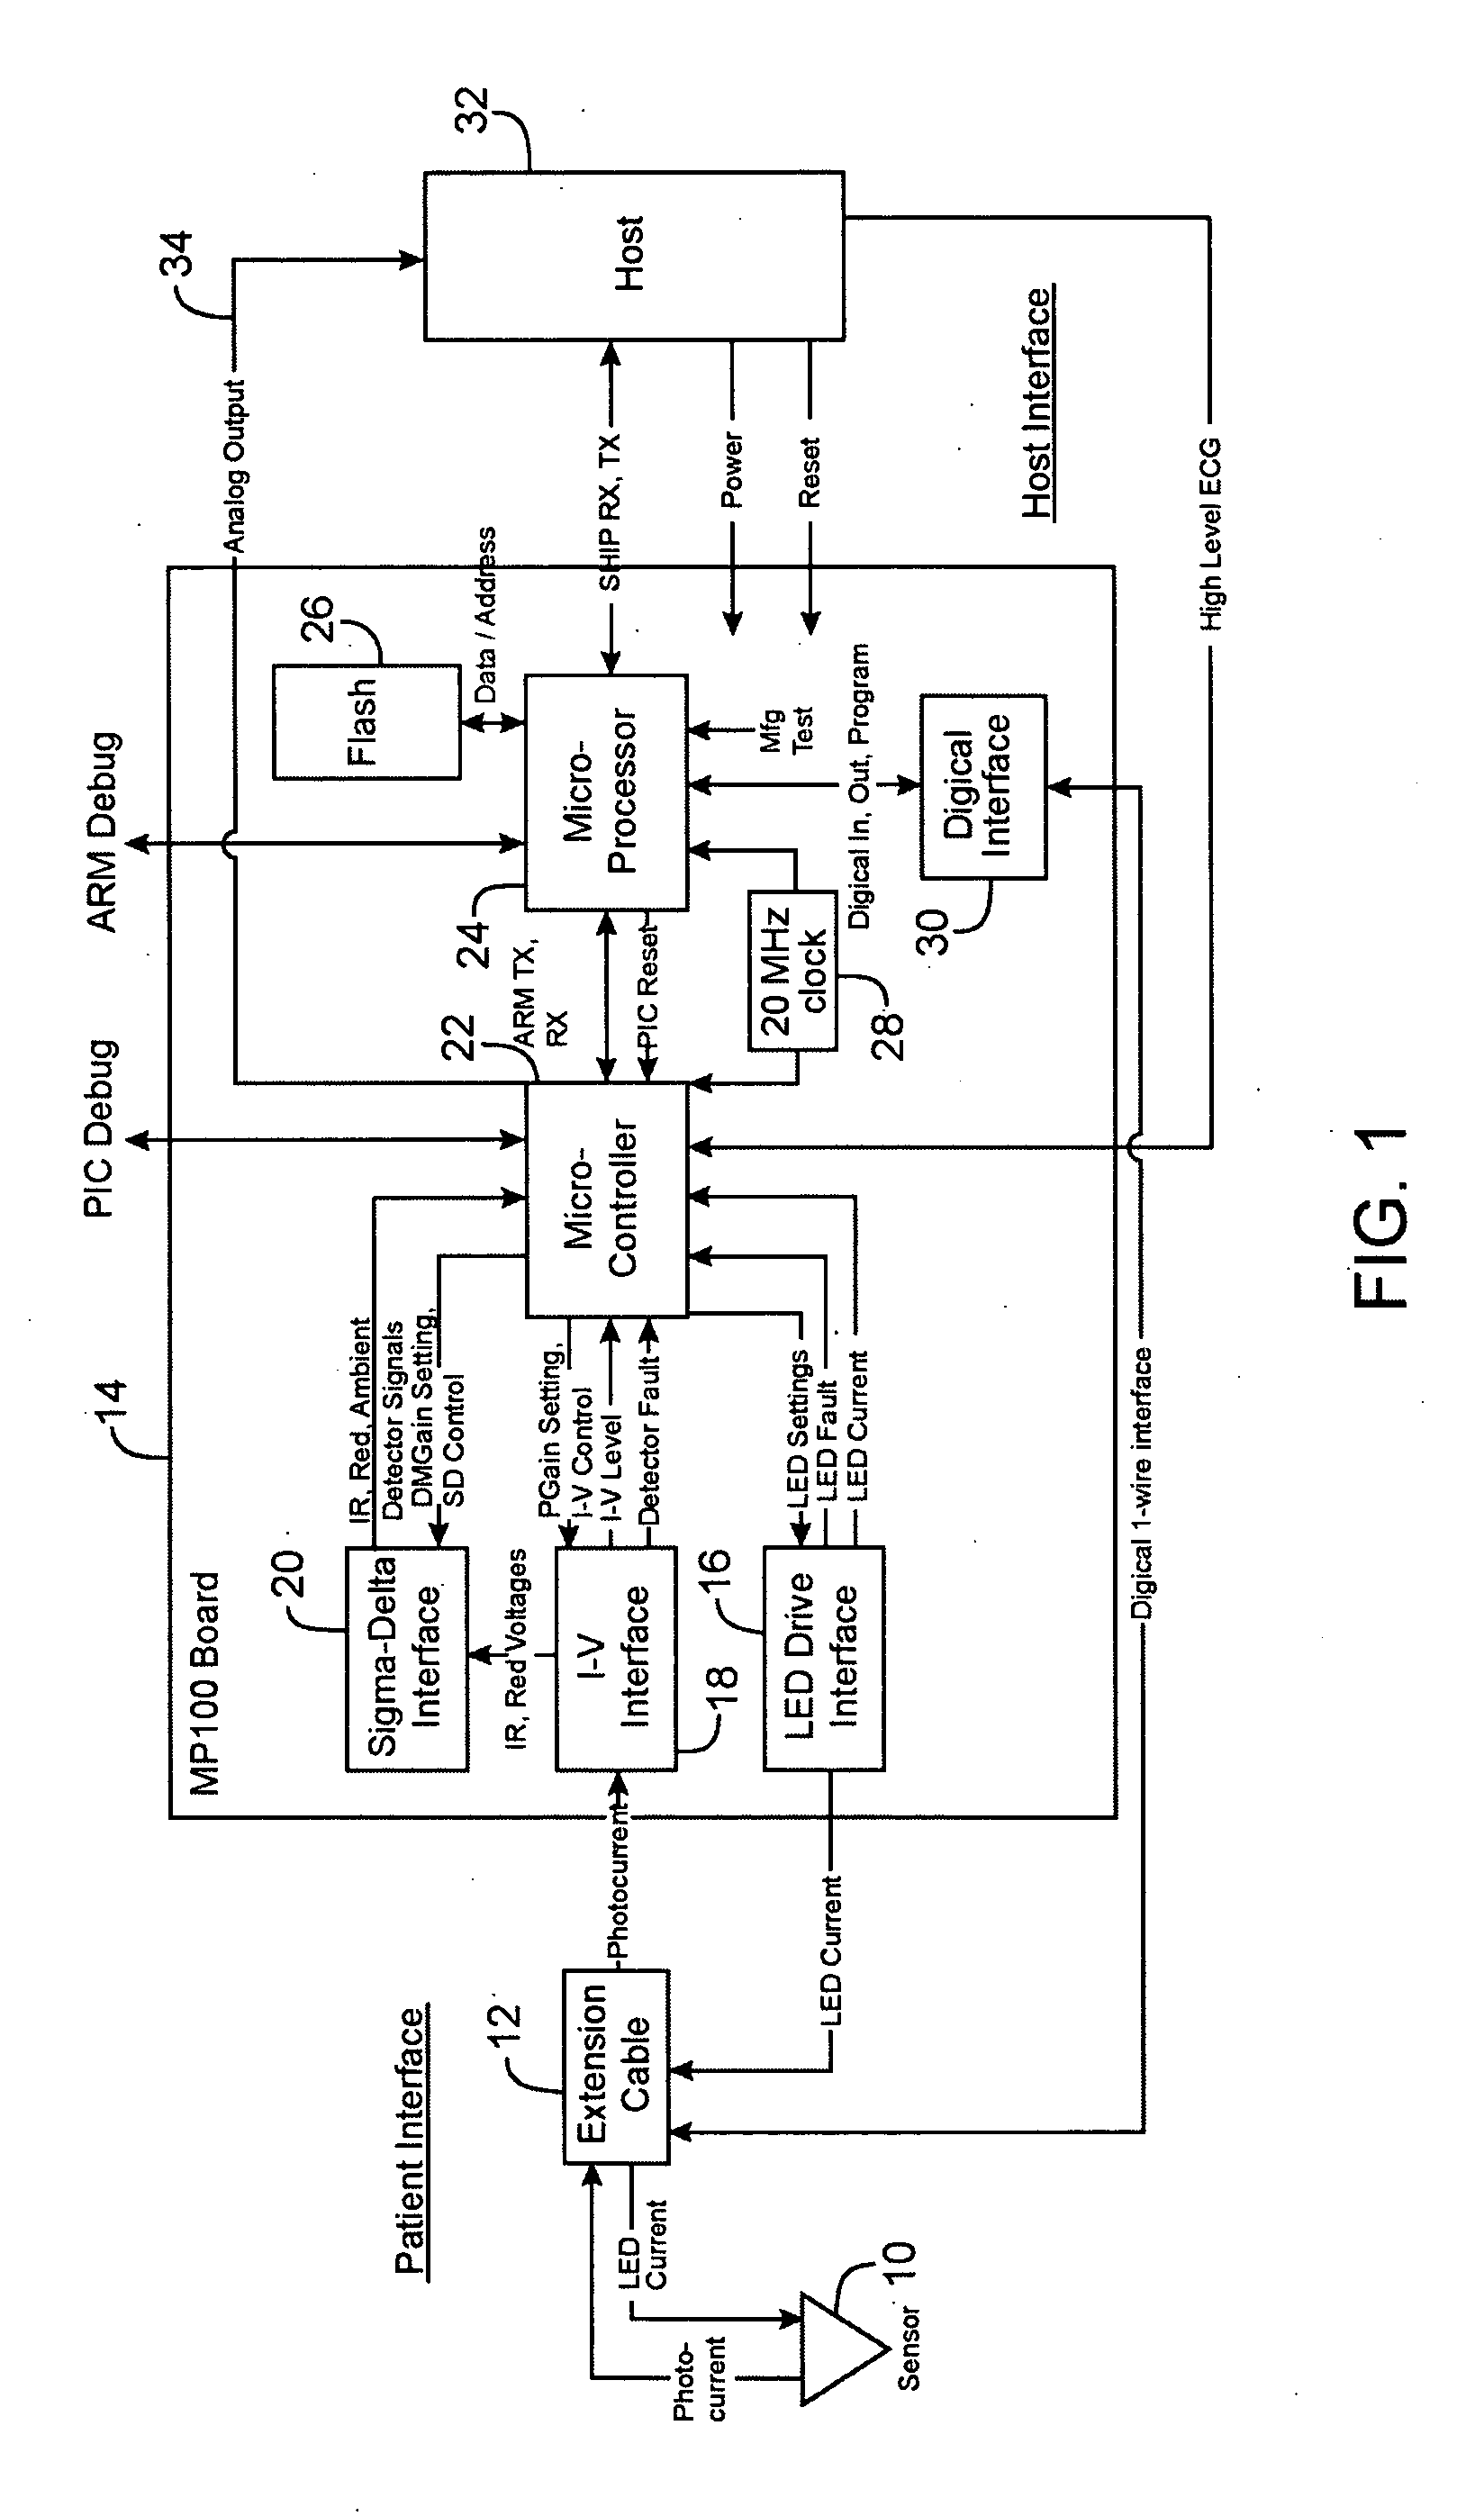 Switch-mode oximeter LED drive with a single inductor